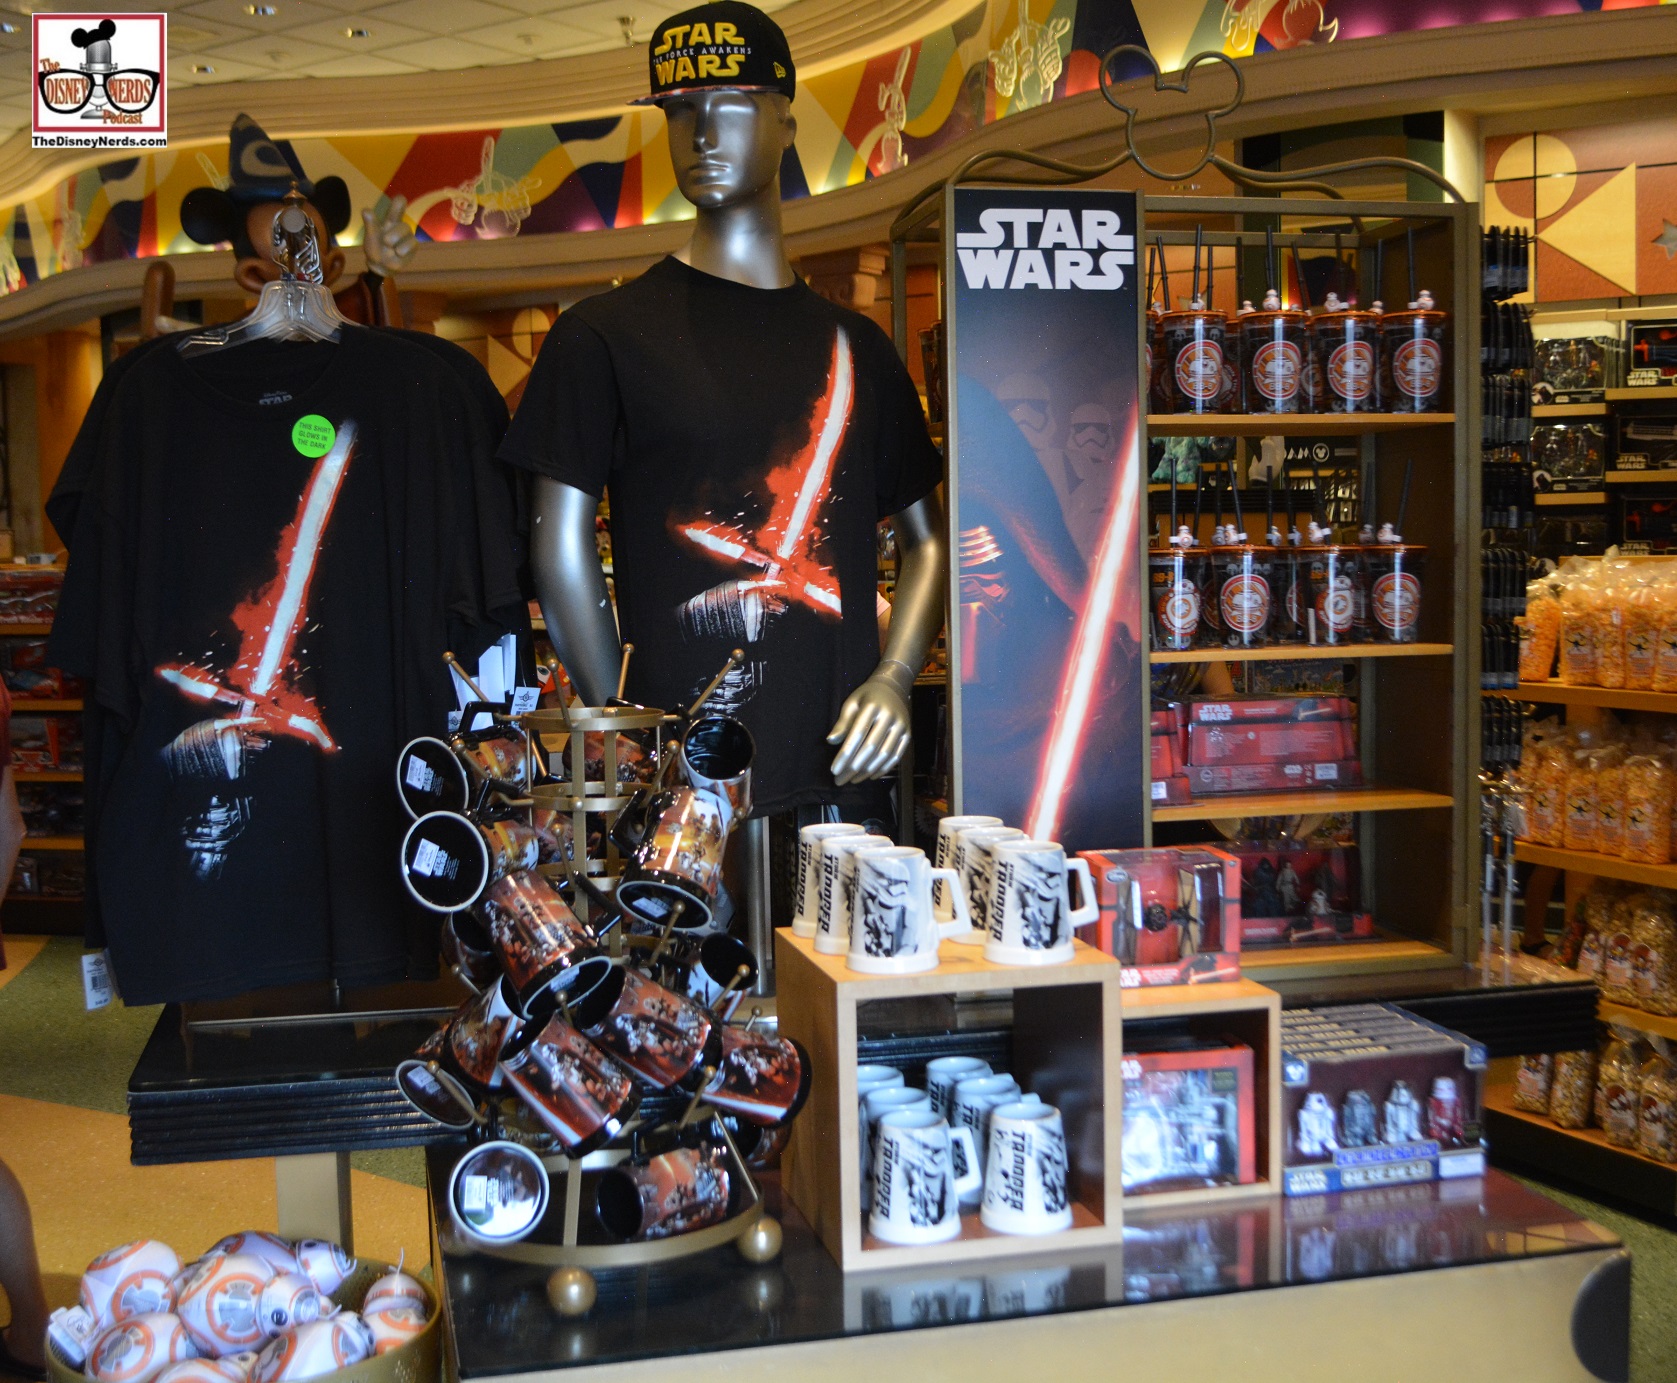 Star Wars has awaken retail all over Walt Disney World - This is front and center in mickey's of Hollywood